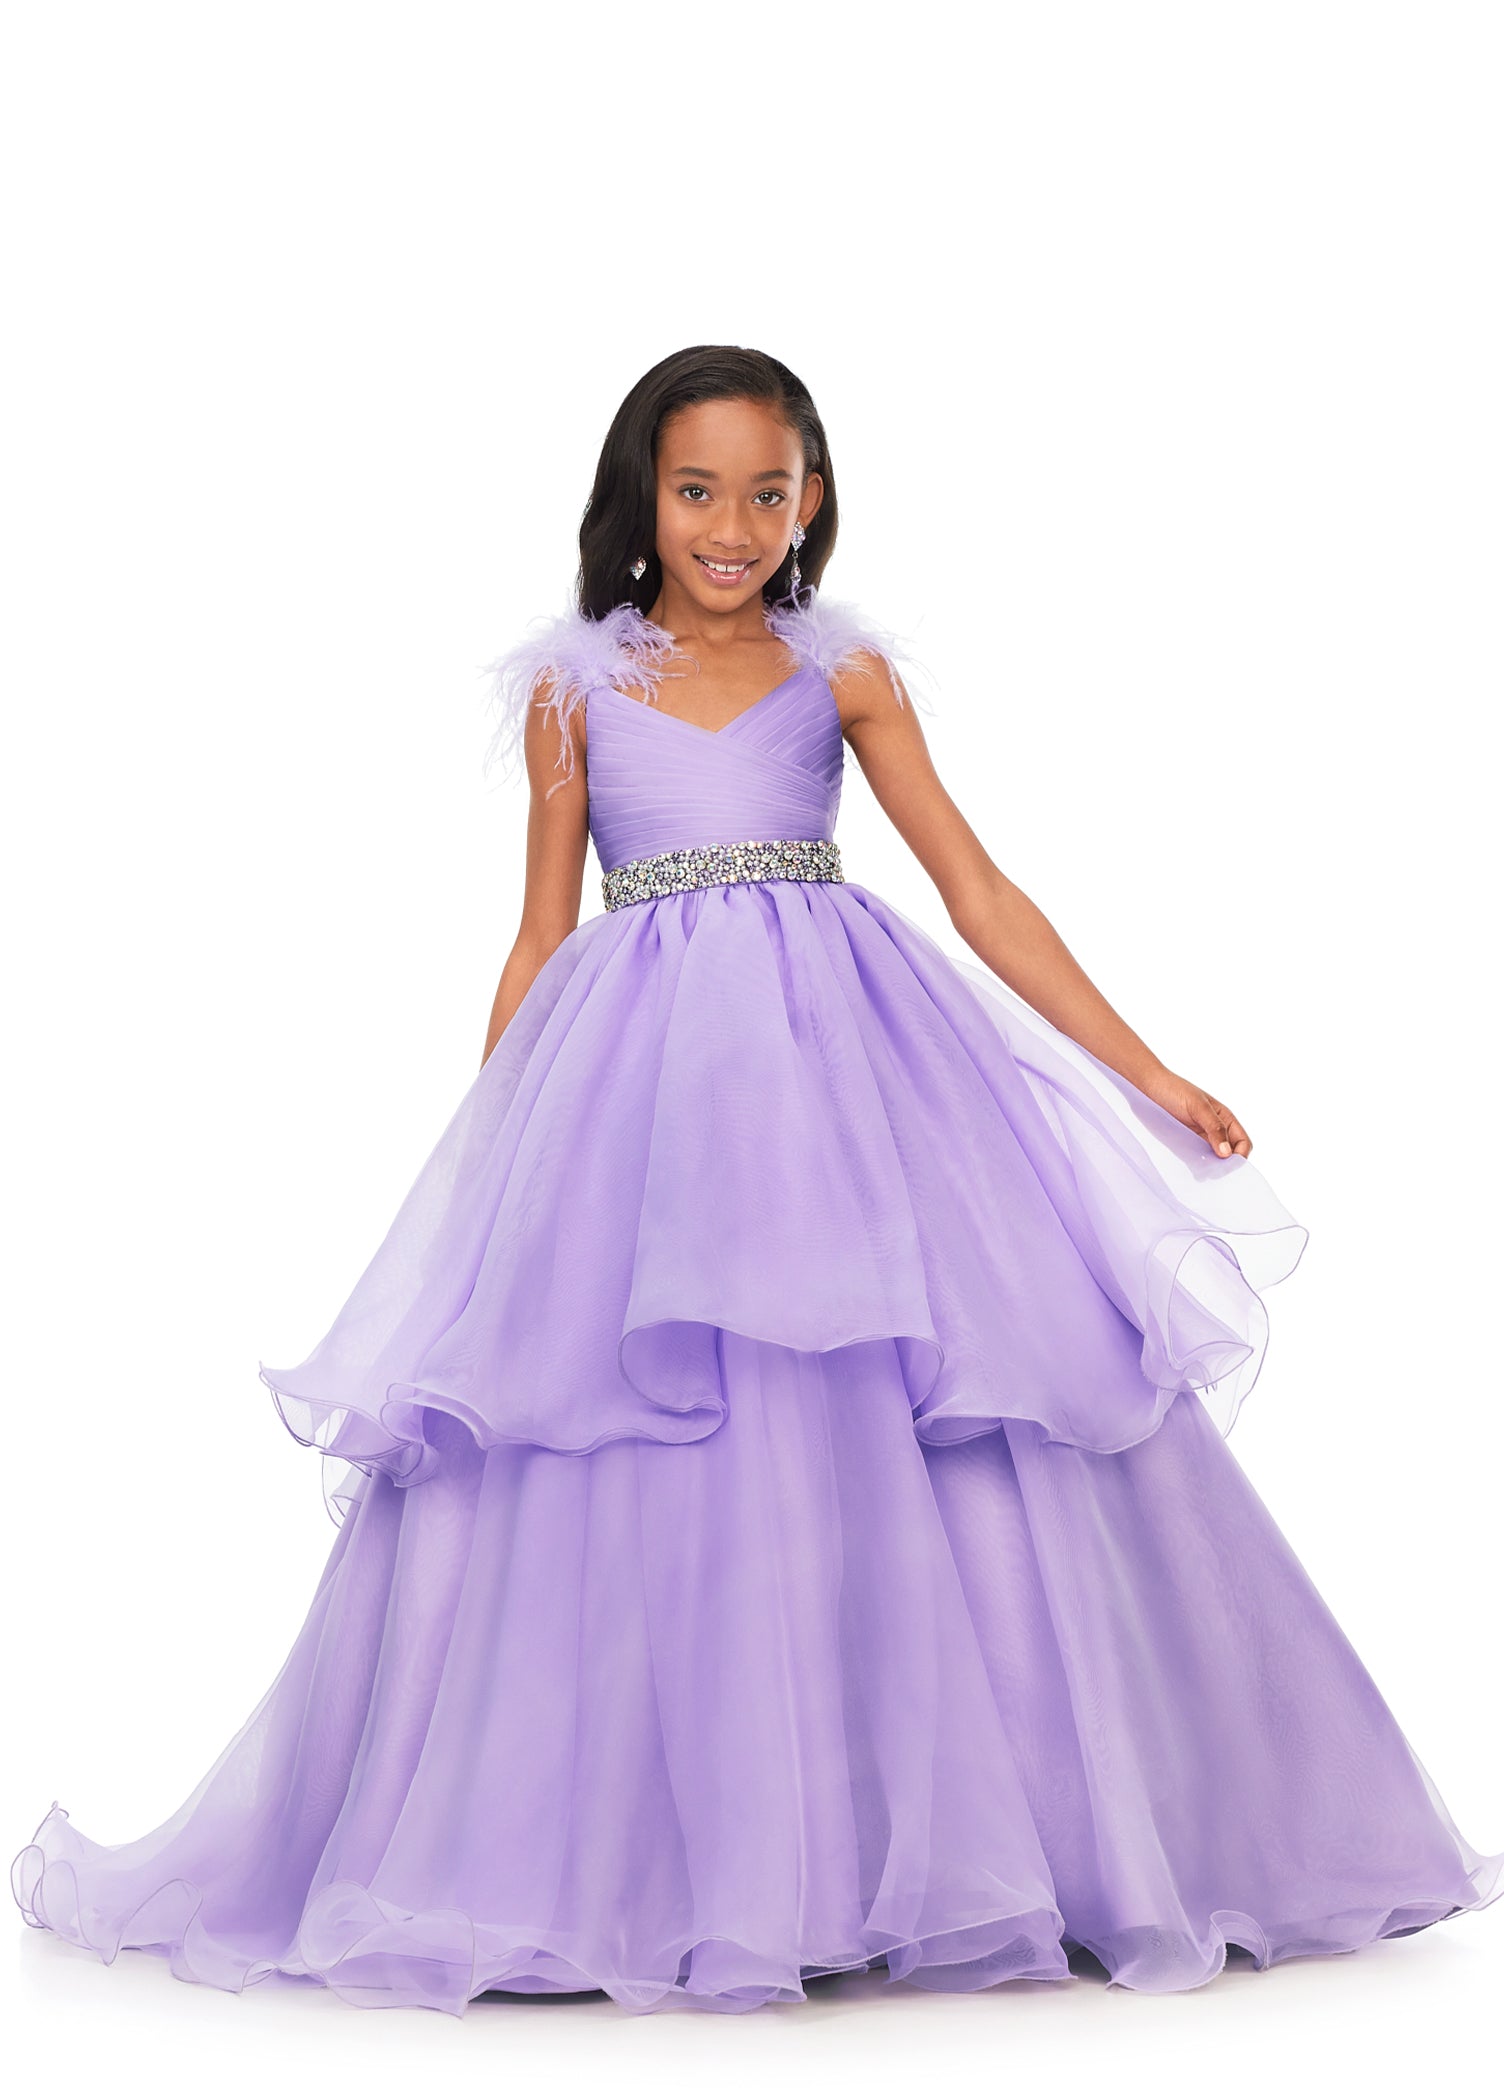 Ashley Lauren Kids 8184 Girls Pageant Dress Ball Gown with Feather Details 16 / Orchid